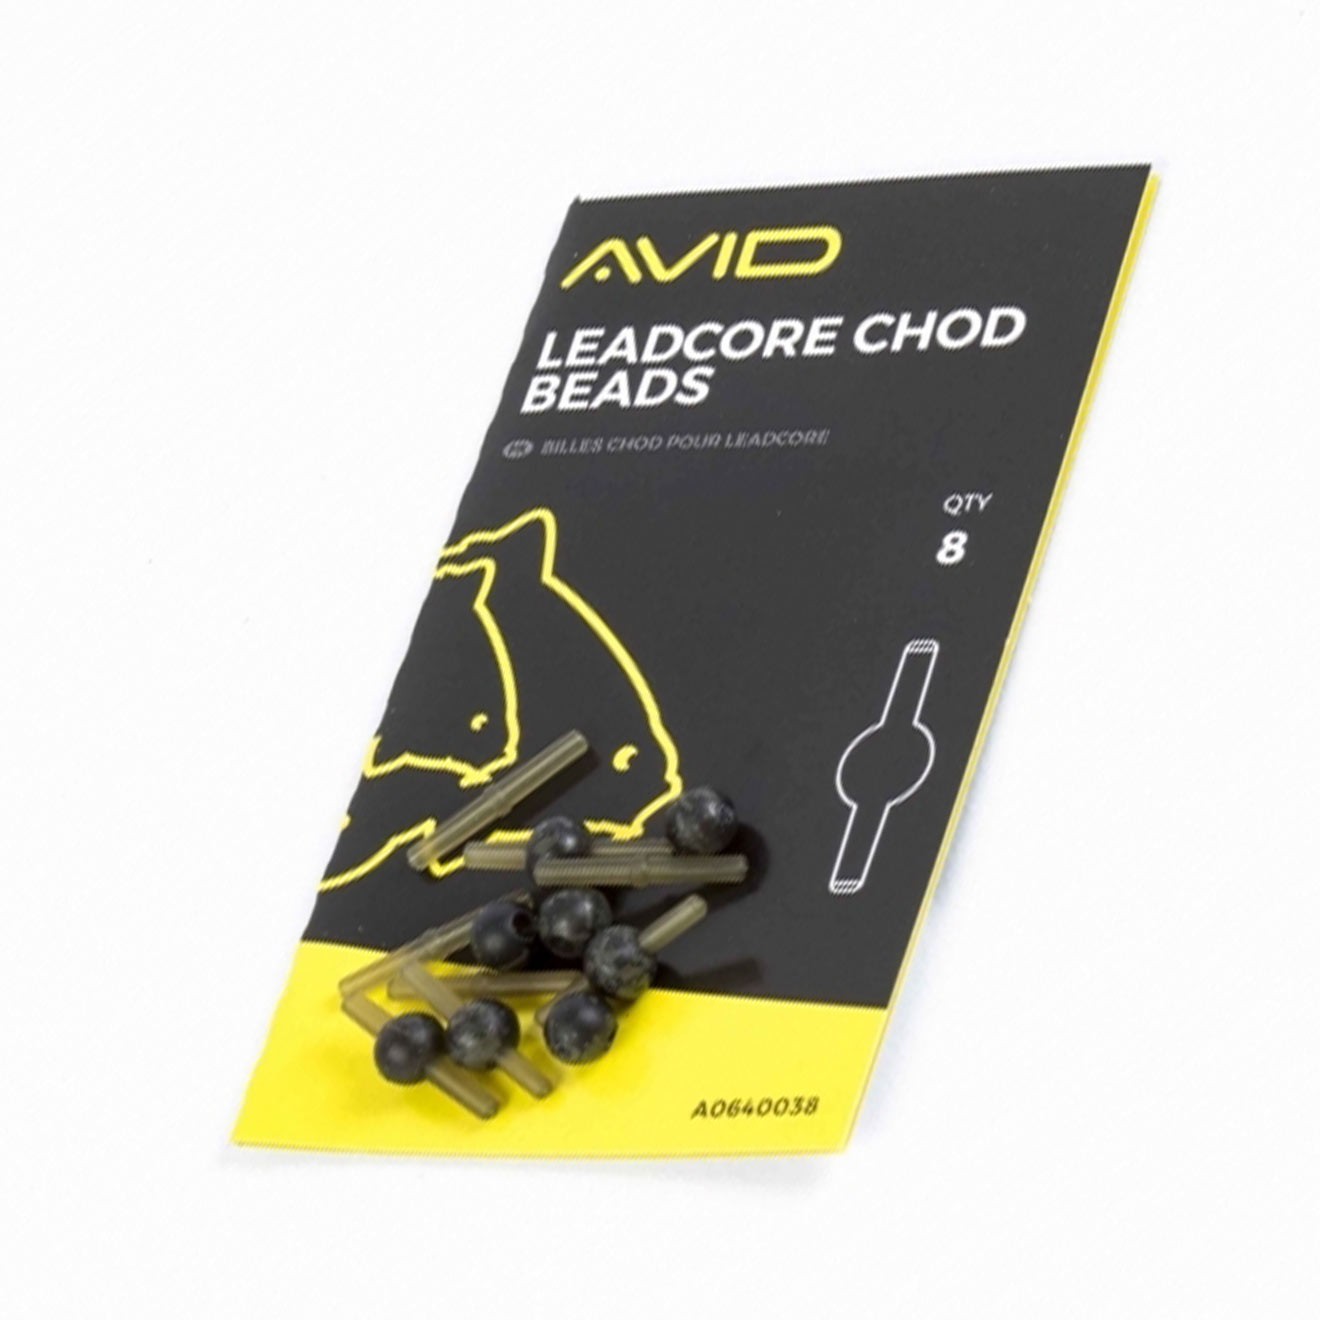 Avid Weighted Leadcore Chod Bead Kit Carp fishing tackle 